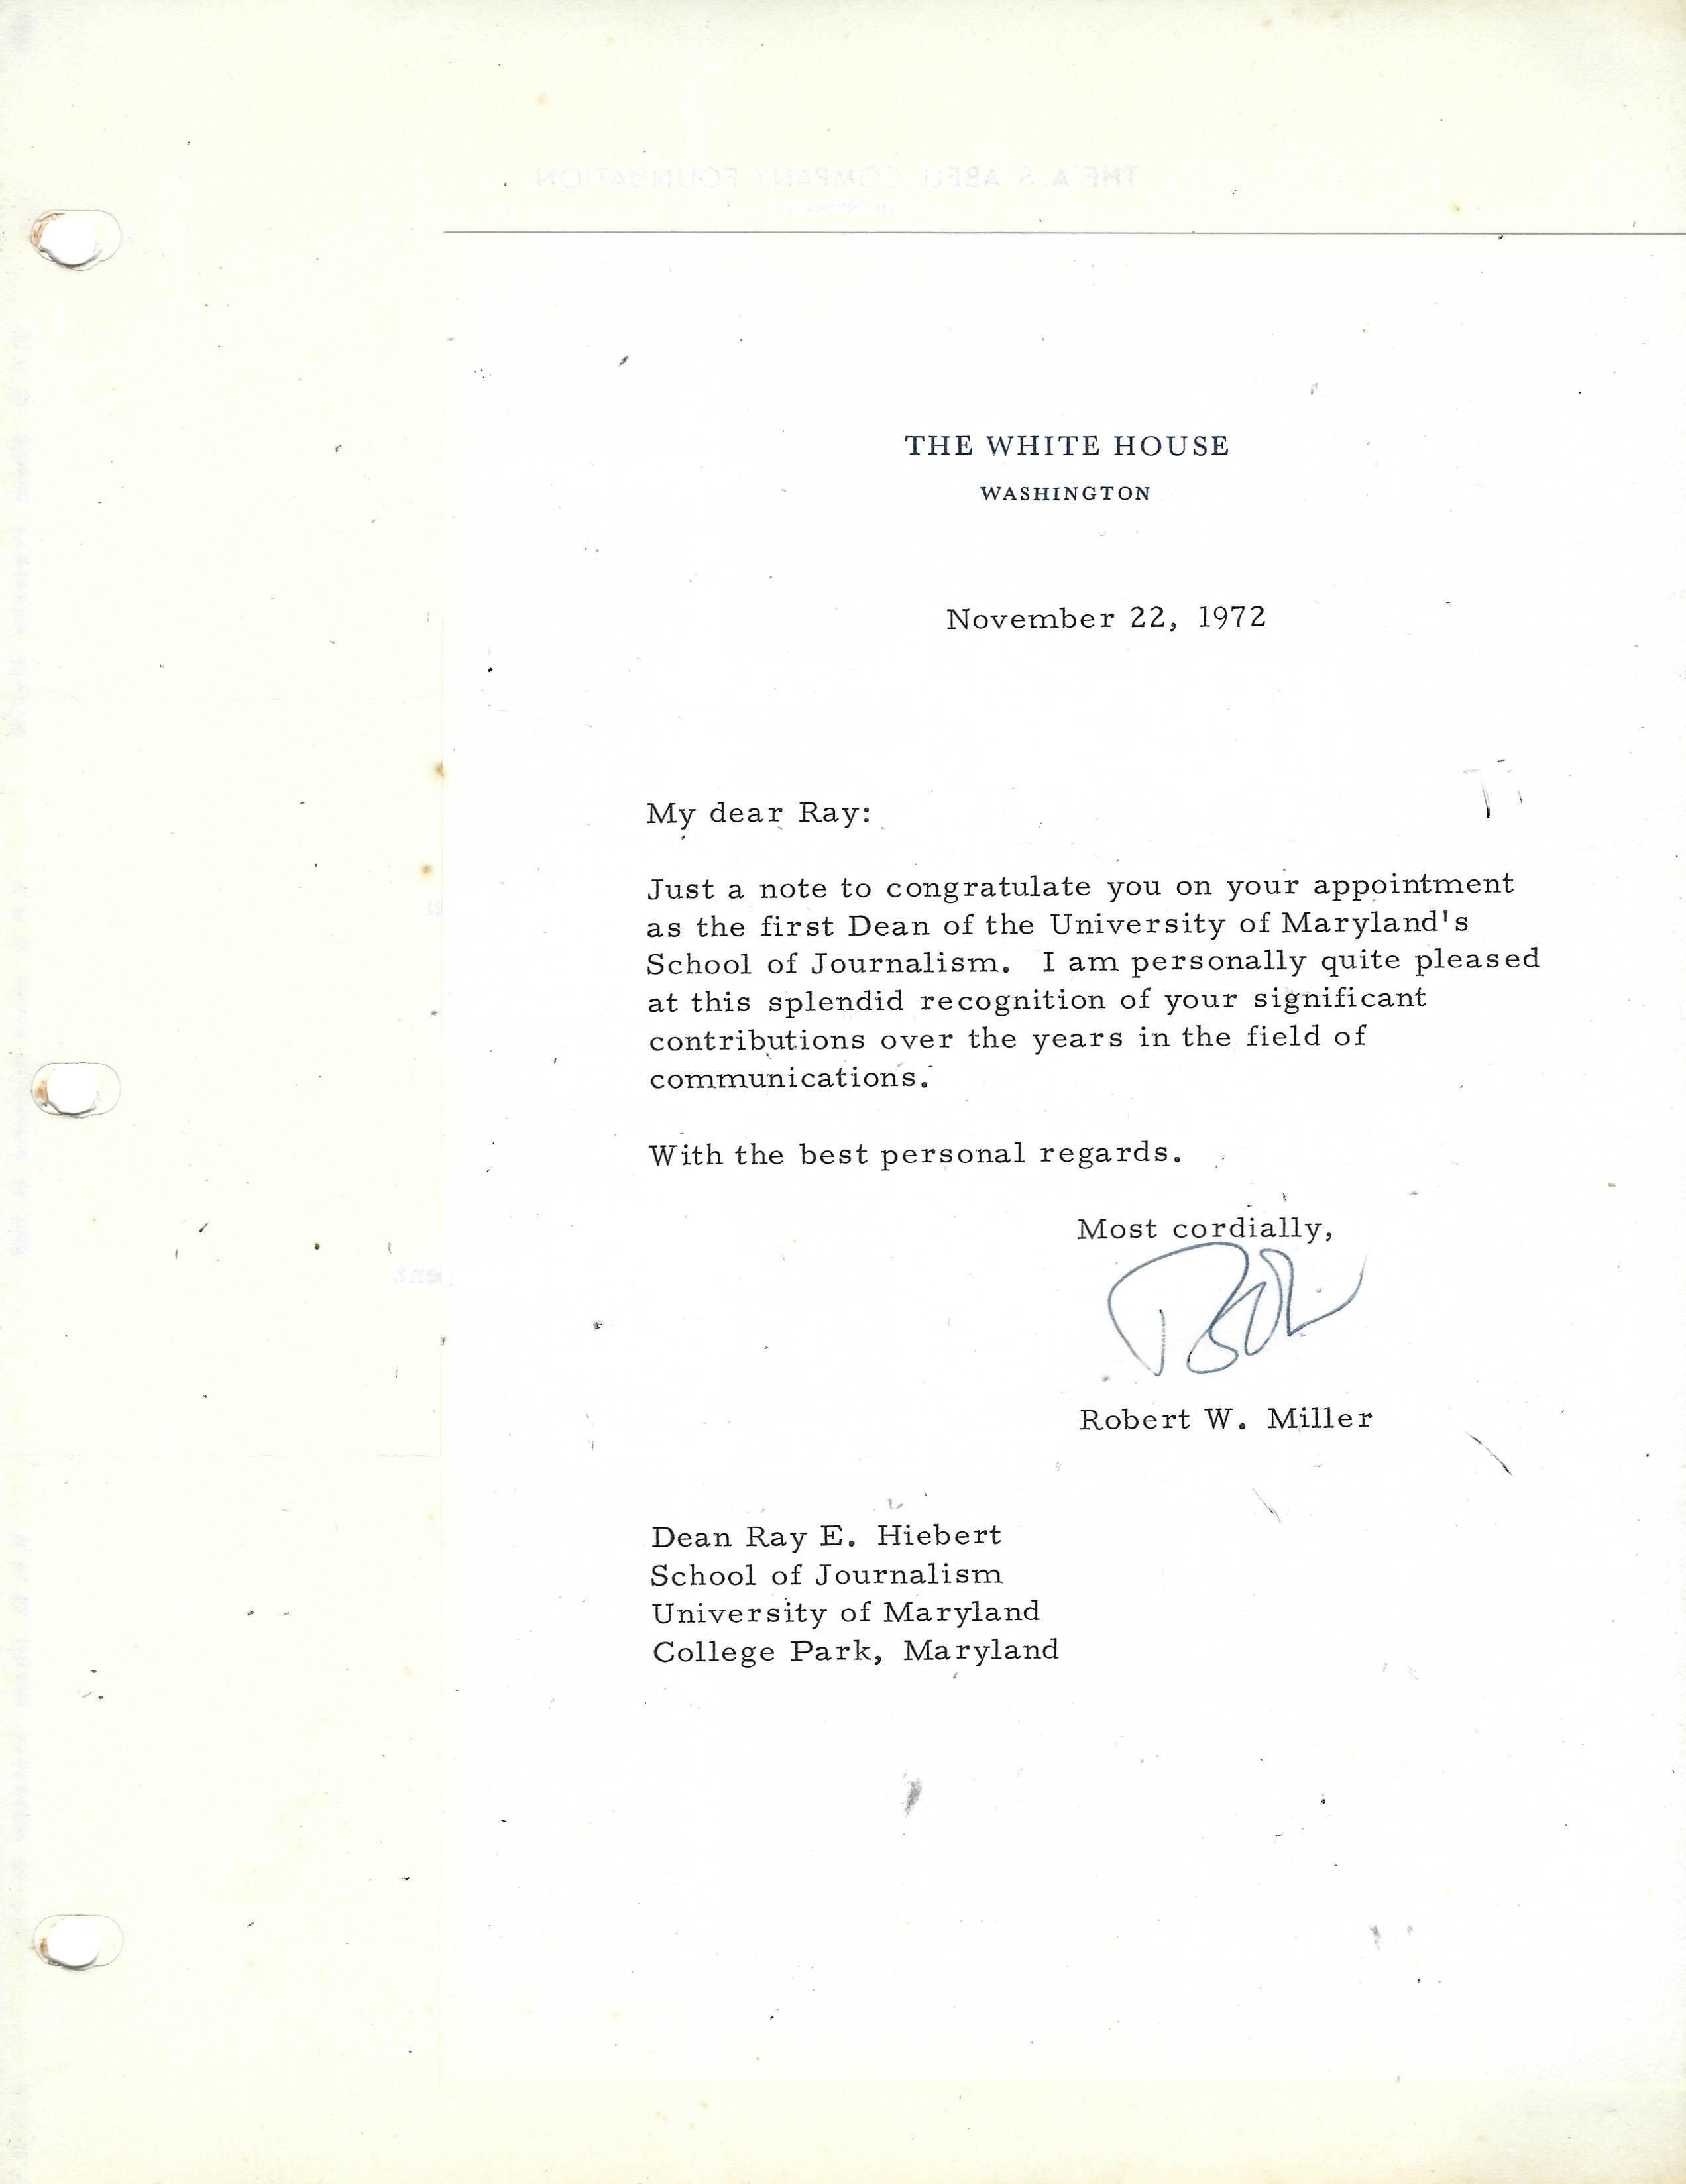 Letter from White House to Ray Hiebert